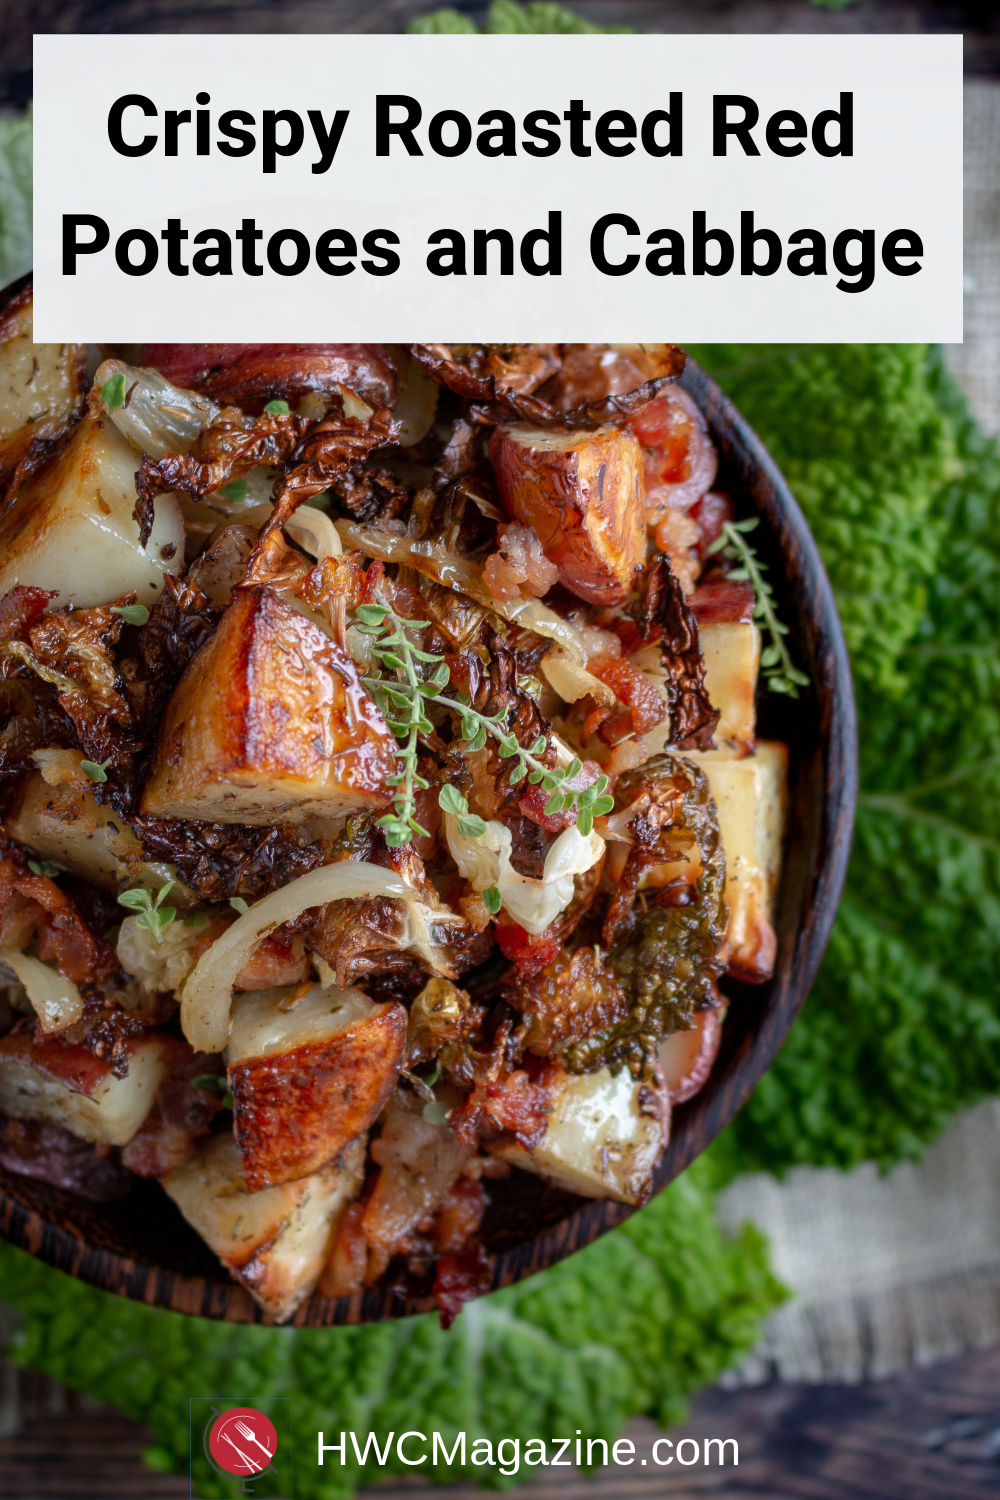 Crispy Roasted Red Potatoes and Cabbage is a quick and easy one pan recipe made with crispy bacon, sweet onions, seasonings and a drizzle of Extra virgin olive oil. Delicious Gluten-free side for St. Patrick's Day/ https://www.hwcmagazine.com